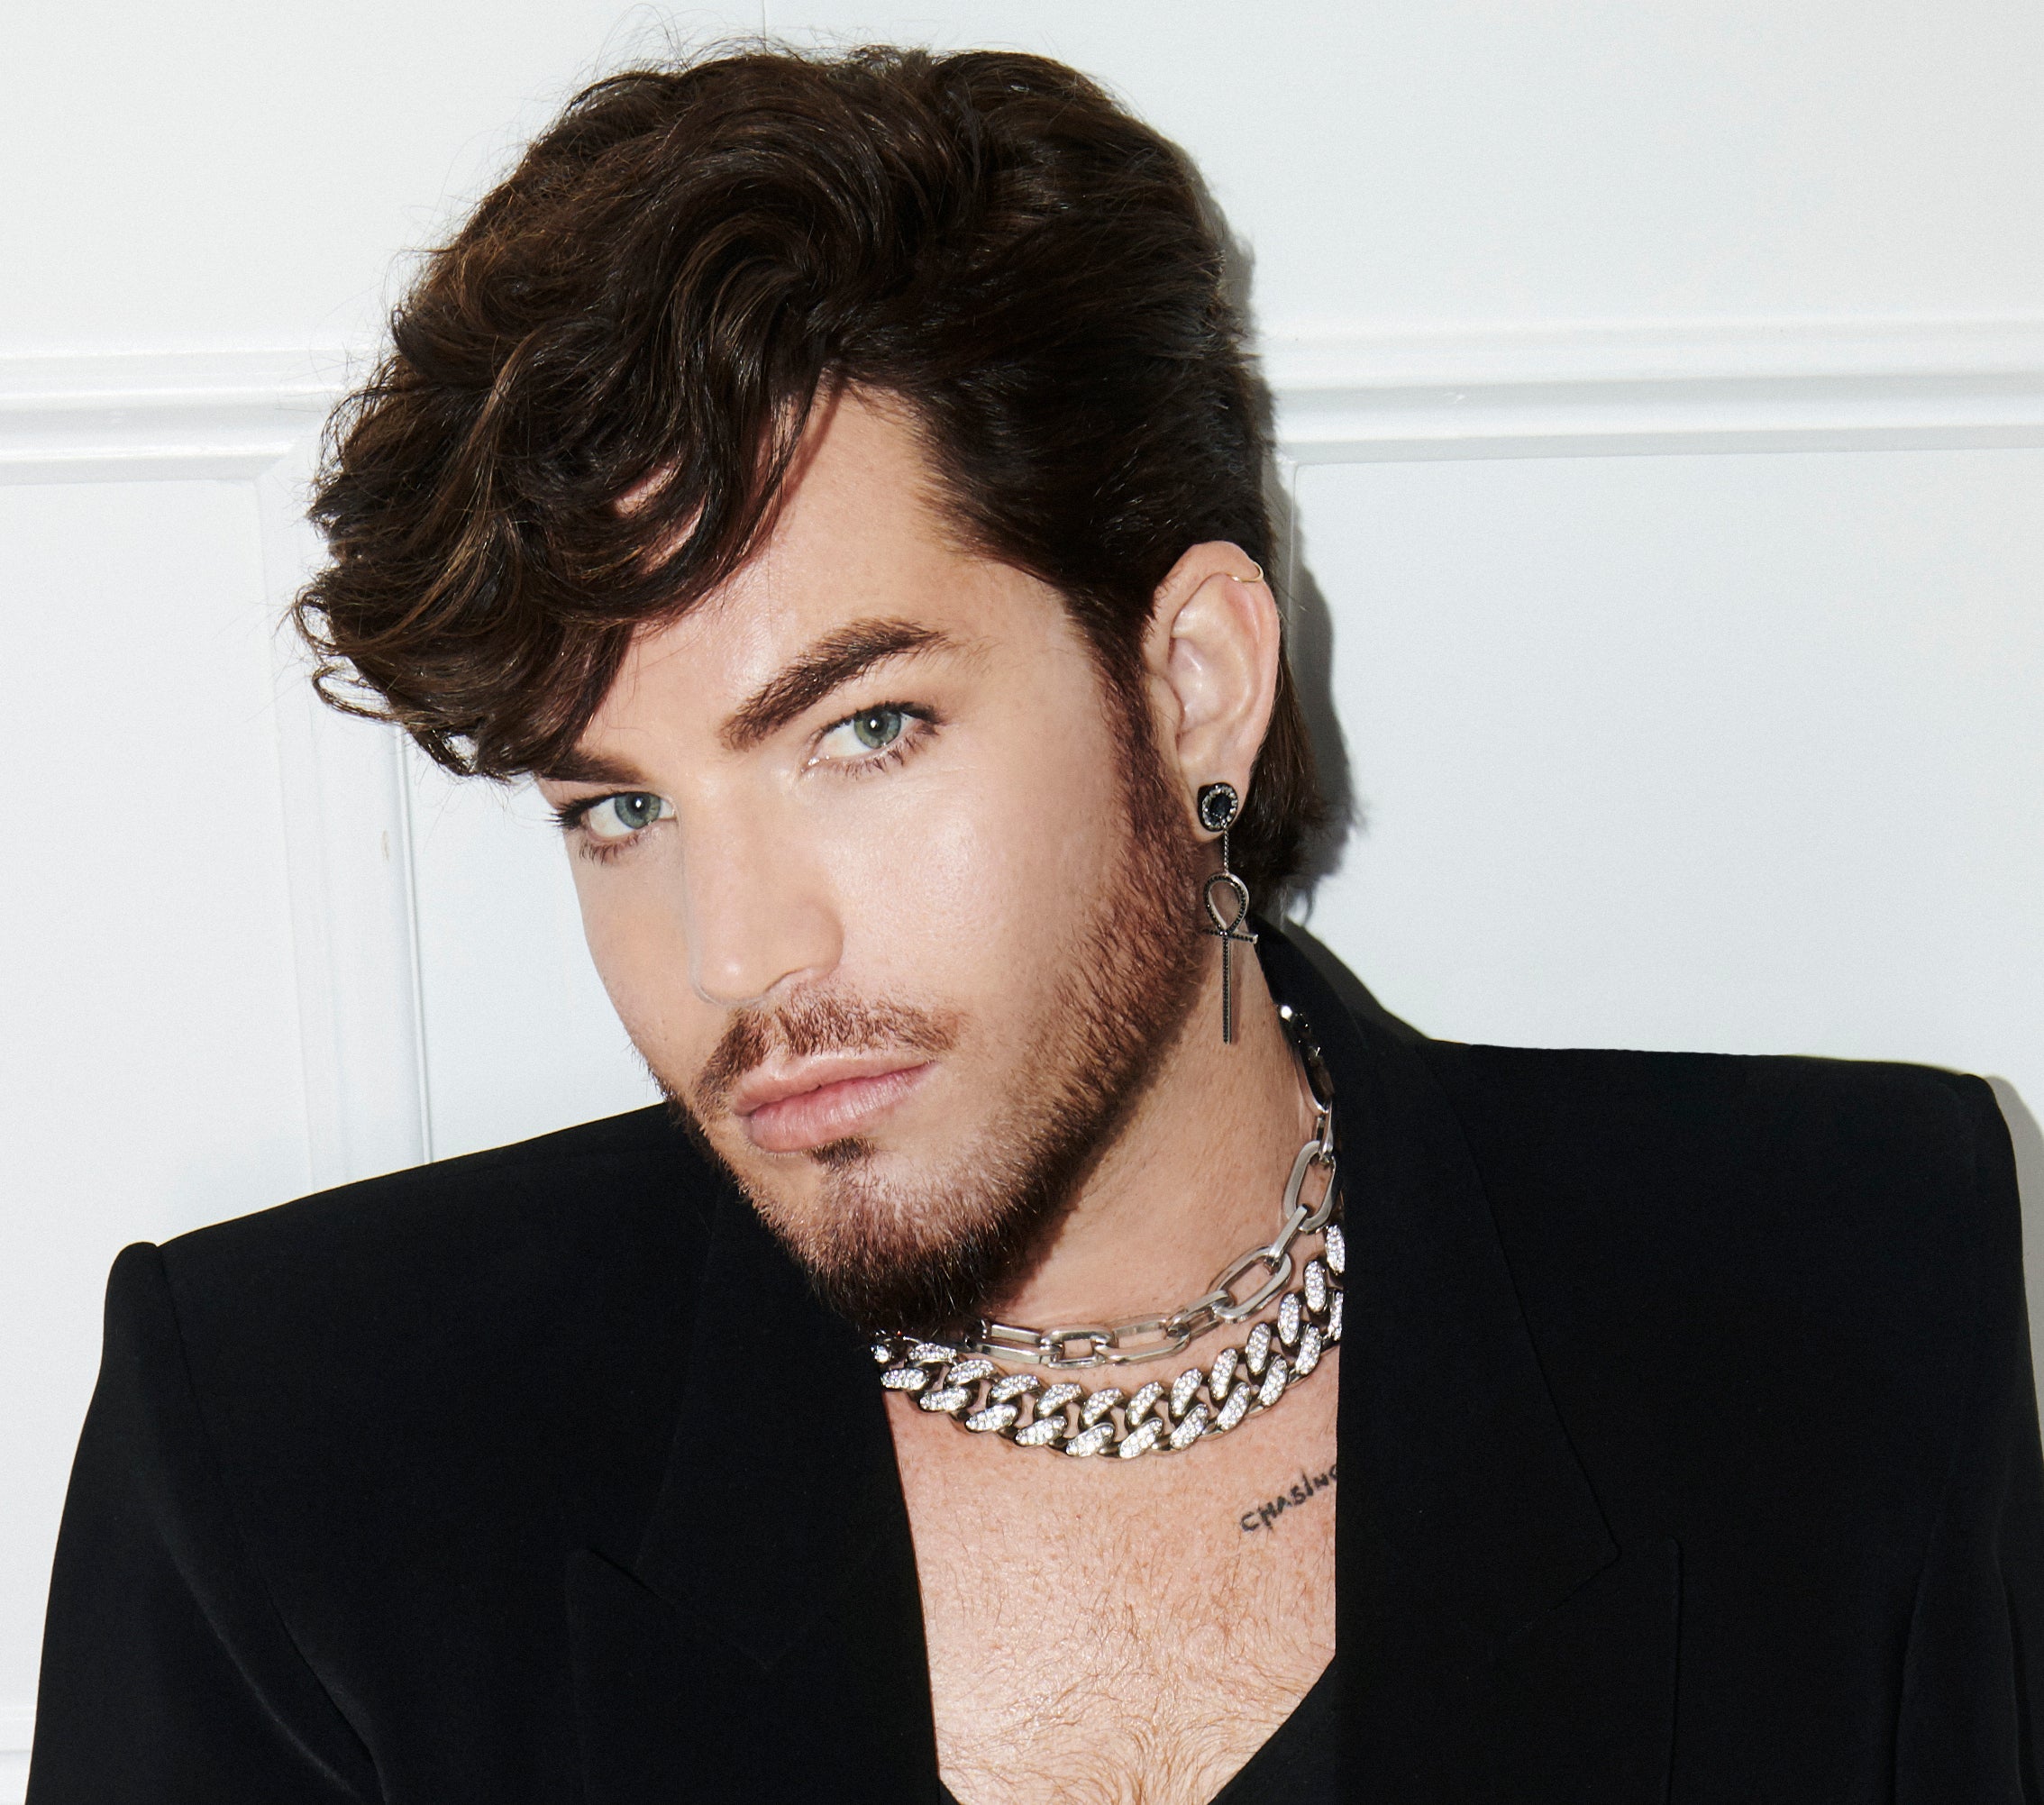 Adam Lambert: ‘Madonna is making the music of 2019 that doesn’t fall quite in line with her legacy. But I have to give it to her that she’s going for it, and she’s ballsy and she’s confident’